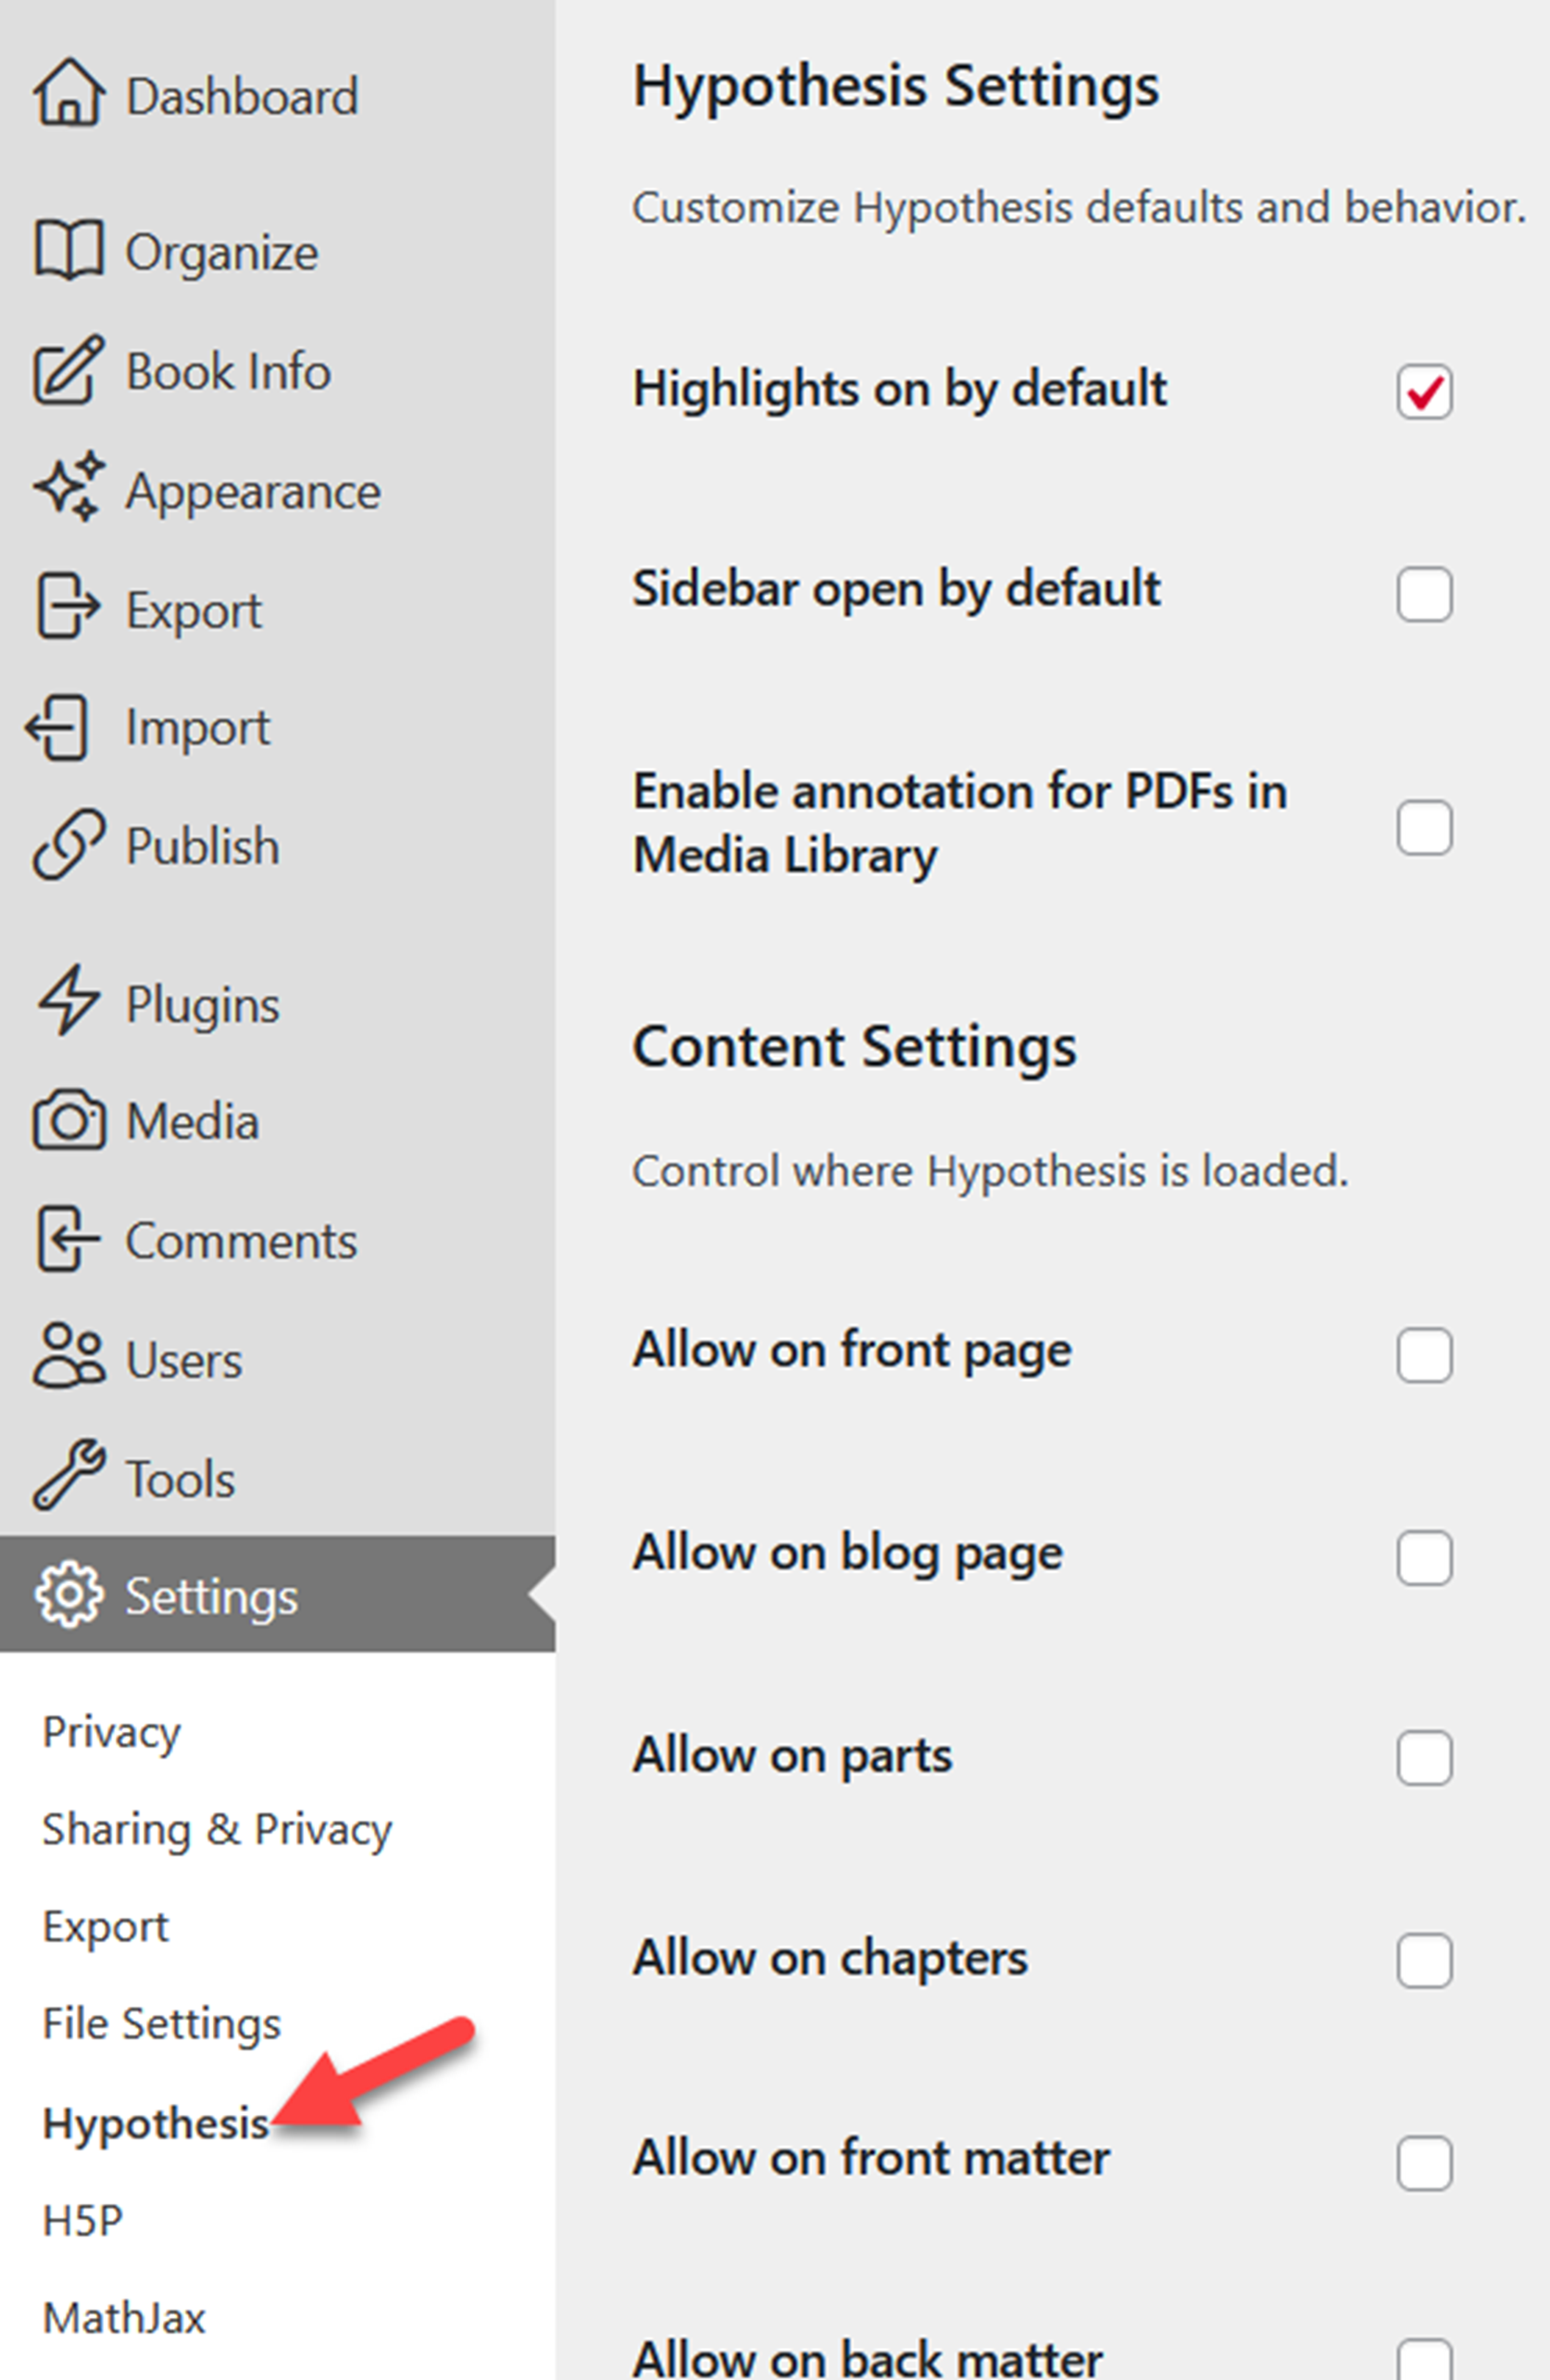 This is the Hypothesis settings page found under the settings area of the left toolbar.